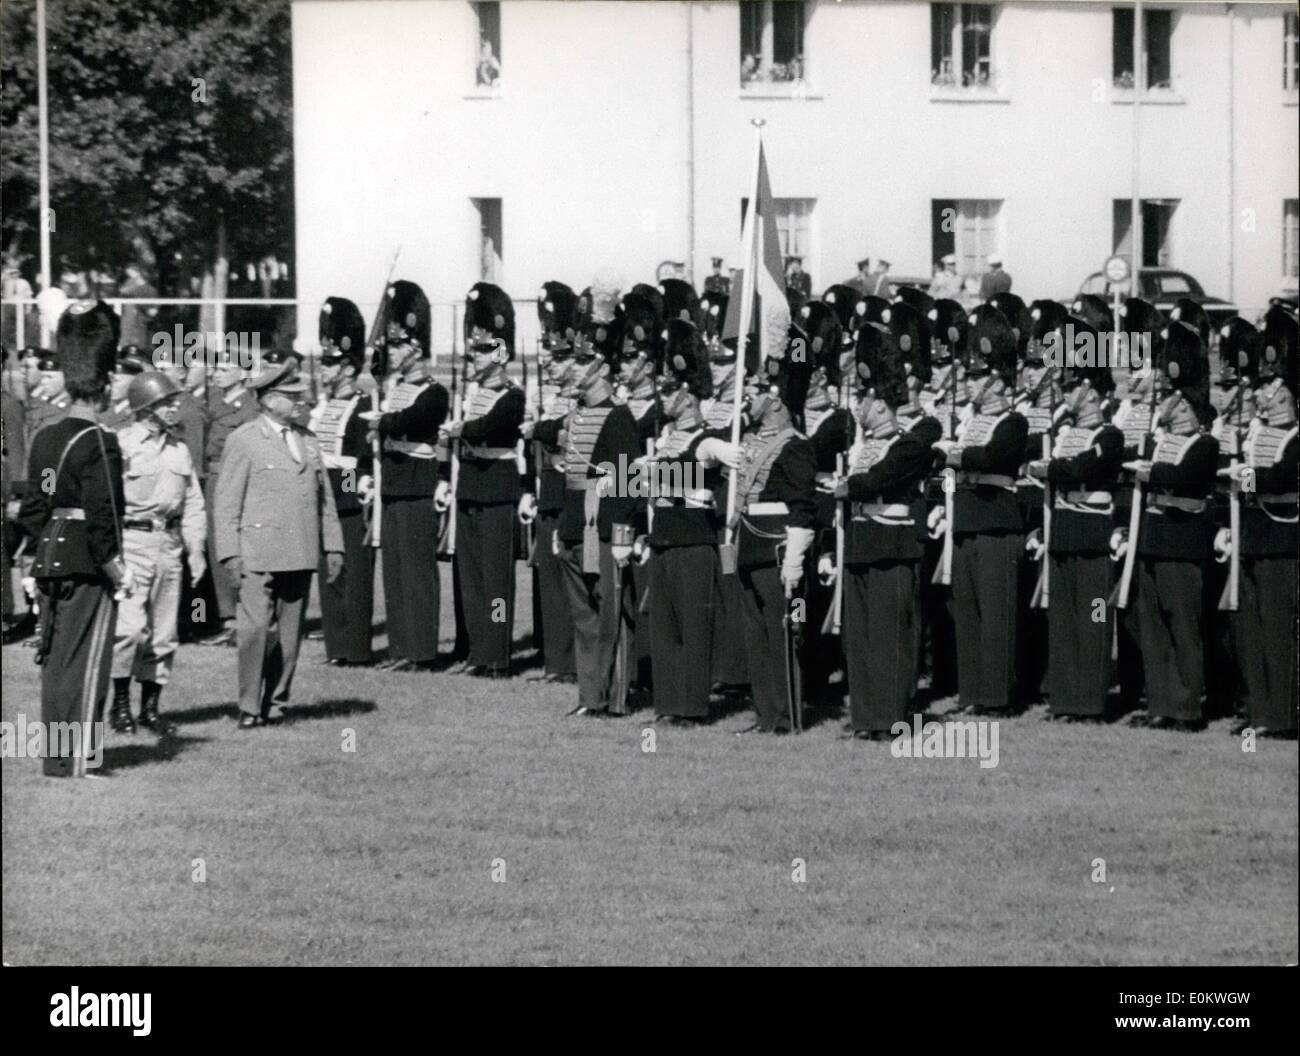 Jun. 06, 1950 - Farawell to General Speidel: A military farawell parade was given to day for General Dr. Hans Speidel since 6 years the Commander of Allied Land Forces Central Europe in Fontainebleau, France. Passing before General Speidel the 11th Battalion of the Grenadiers of the Garde (Holland) Stock Photo